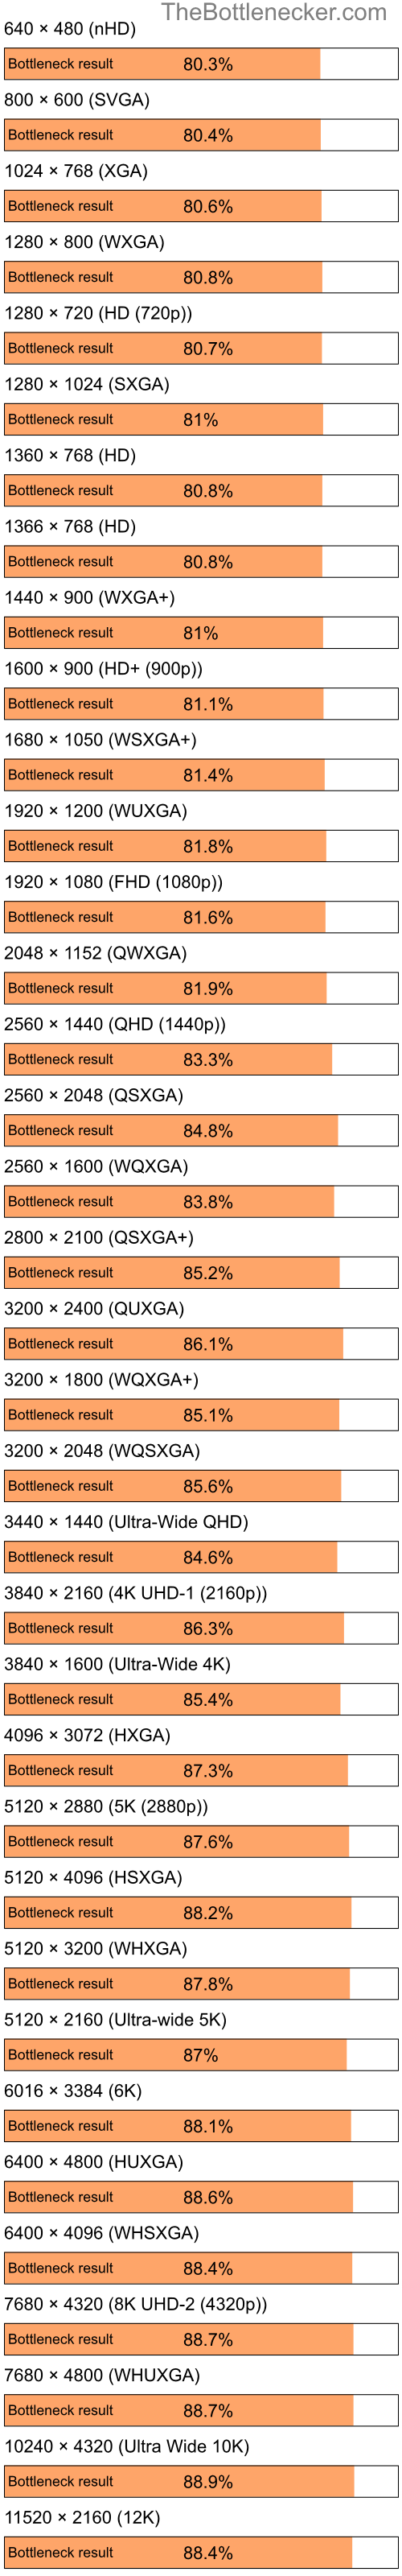 Bottleneck results by resolution for Intel Celeron M 410 and AMD Mobility Radeon 9600 in Graphic Card Intense Tasks